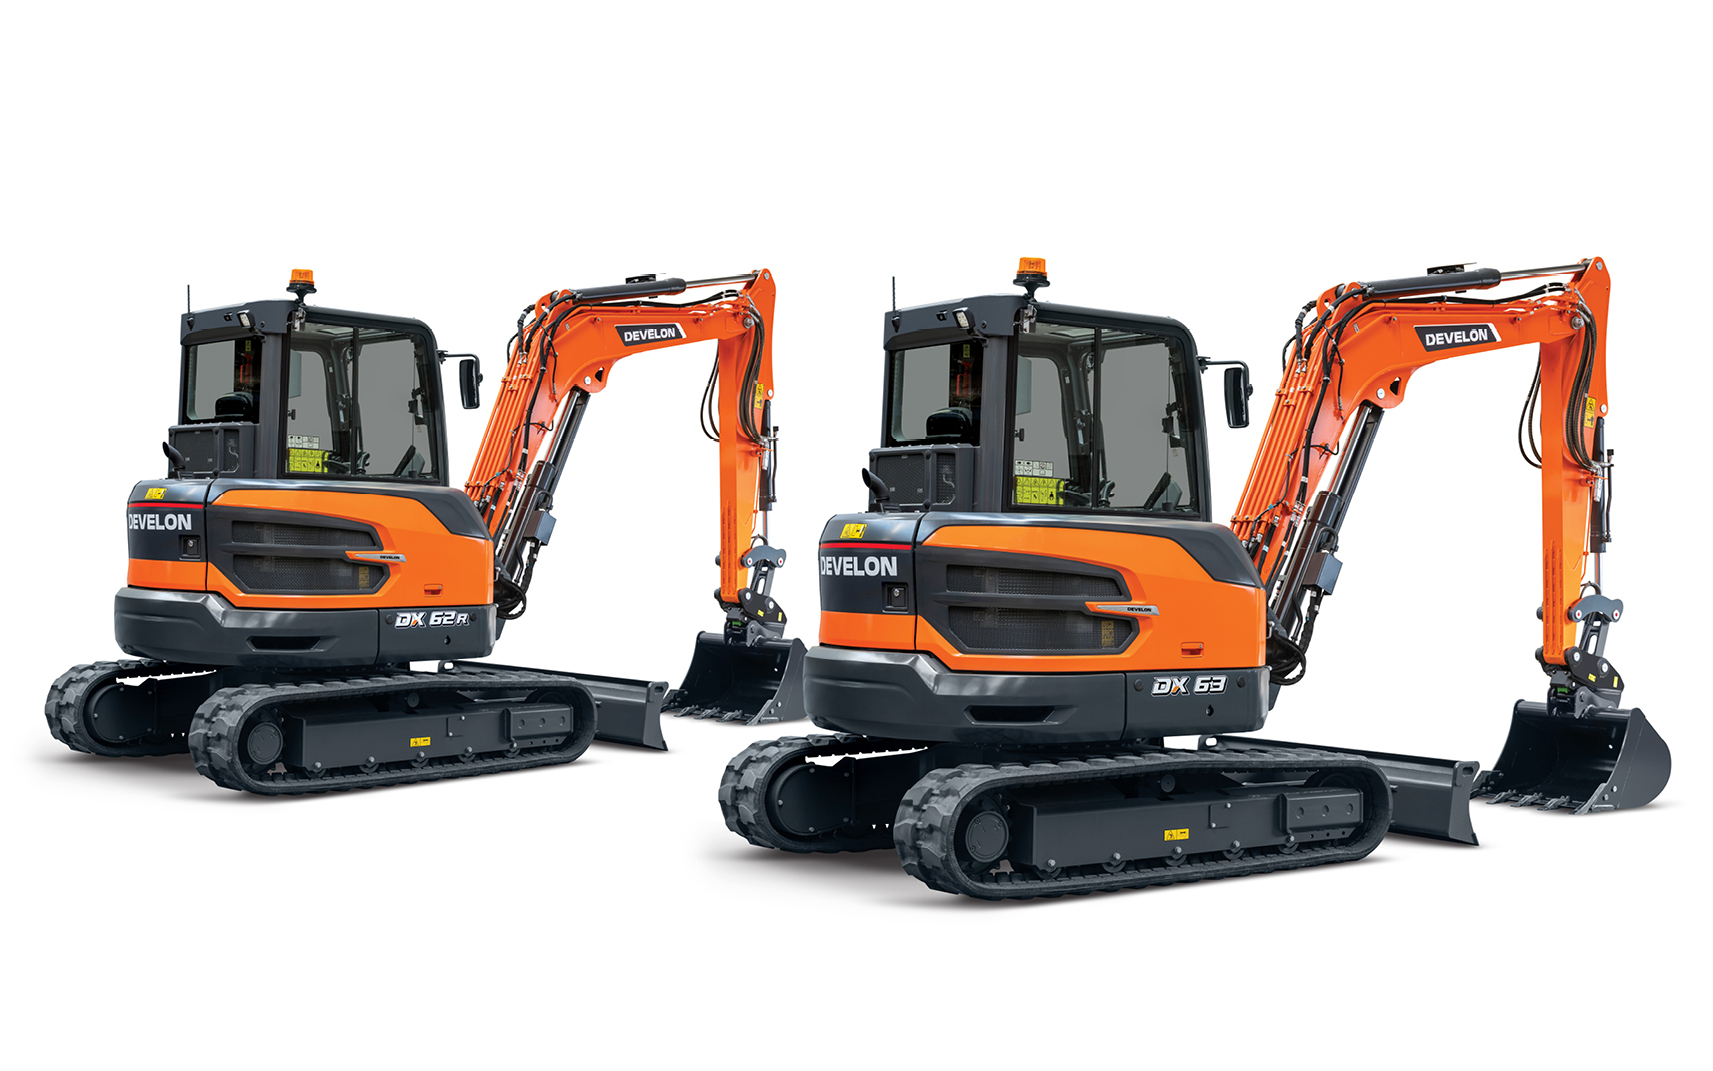 COBs of the DEVELON DX62R-7 and DX63-7 mini excavators with their updated design.